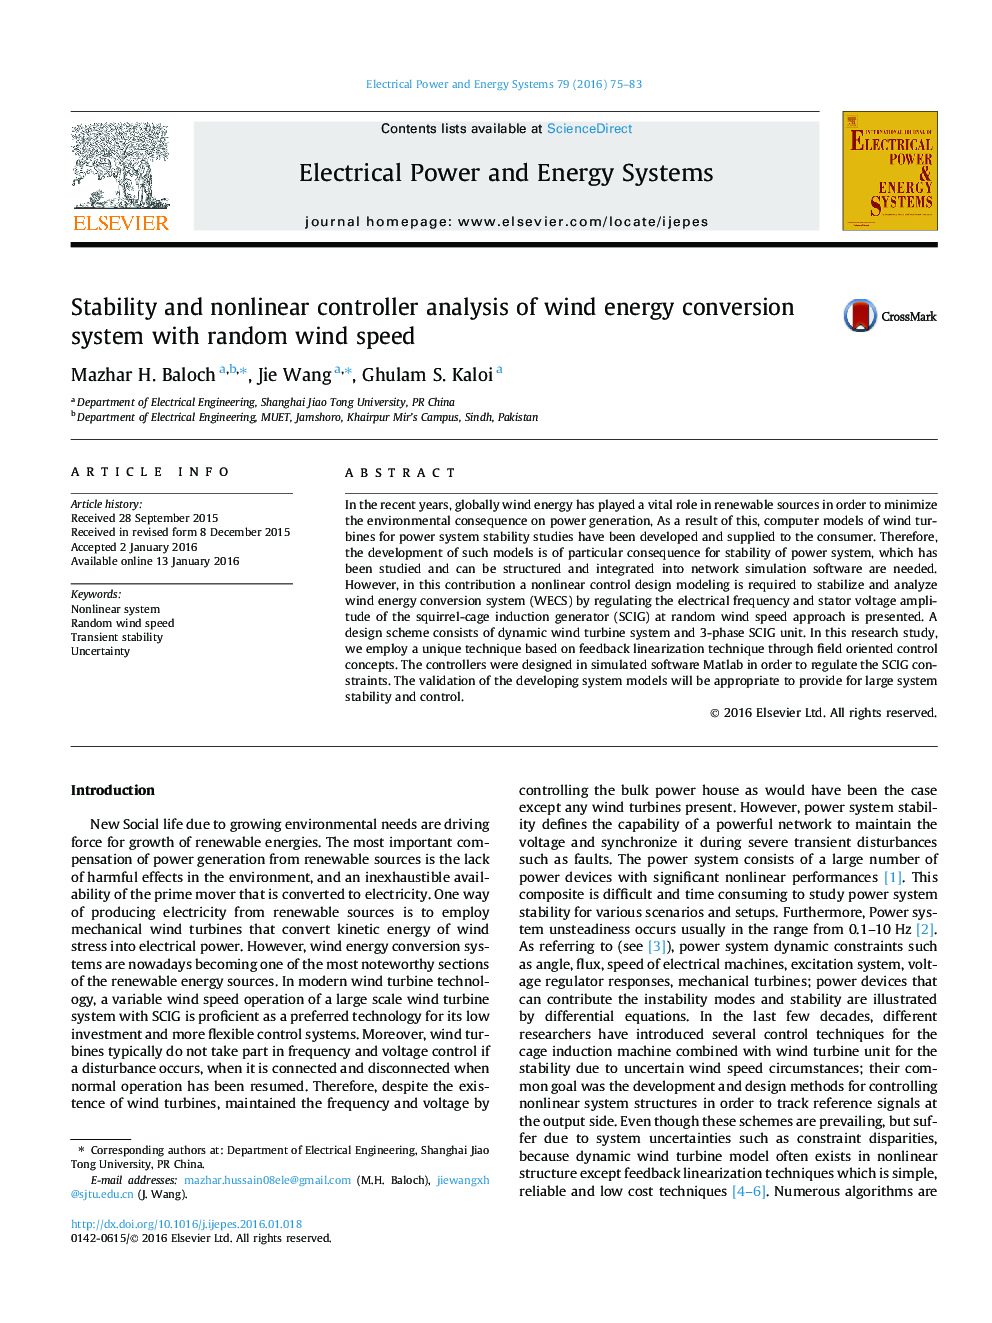 Stability and nonlinear controller analysis of wind energy conversion system with random wind speed